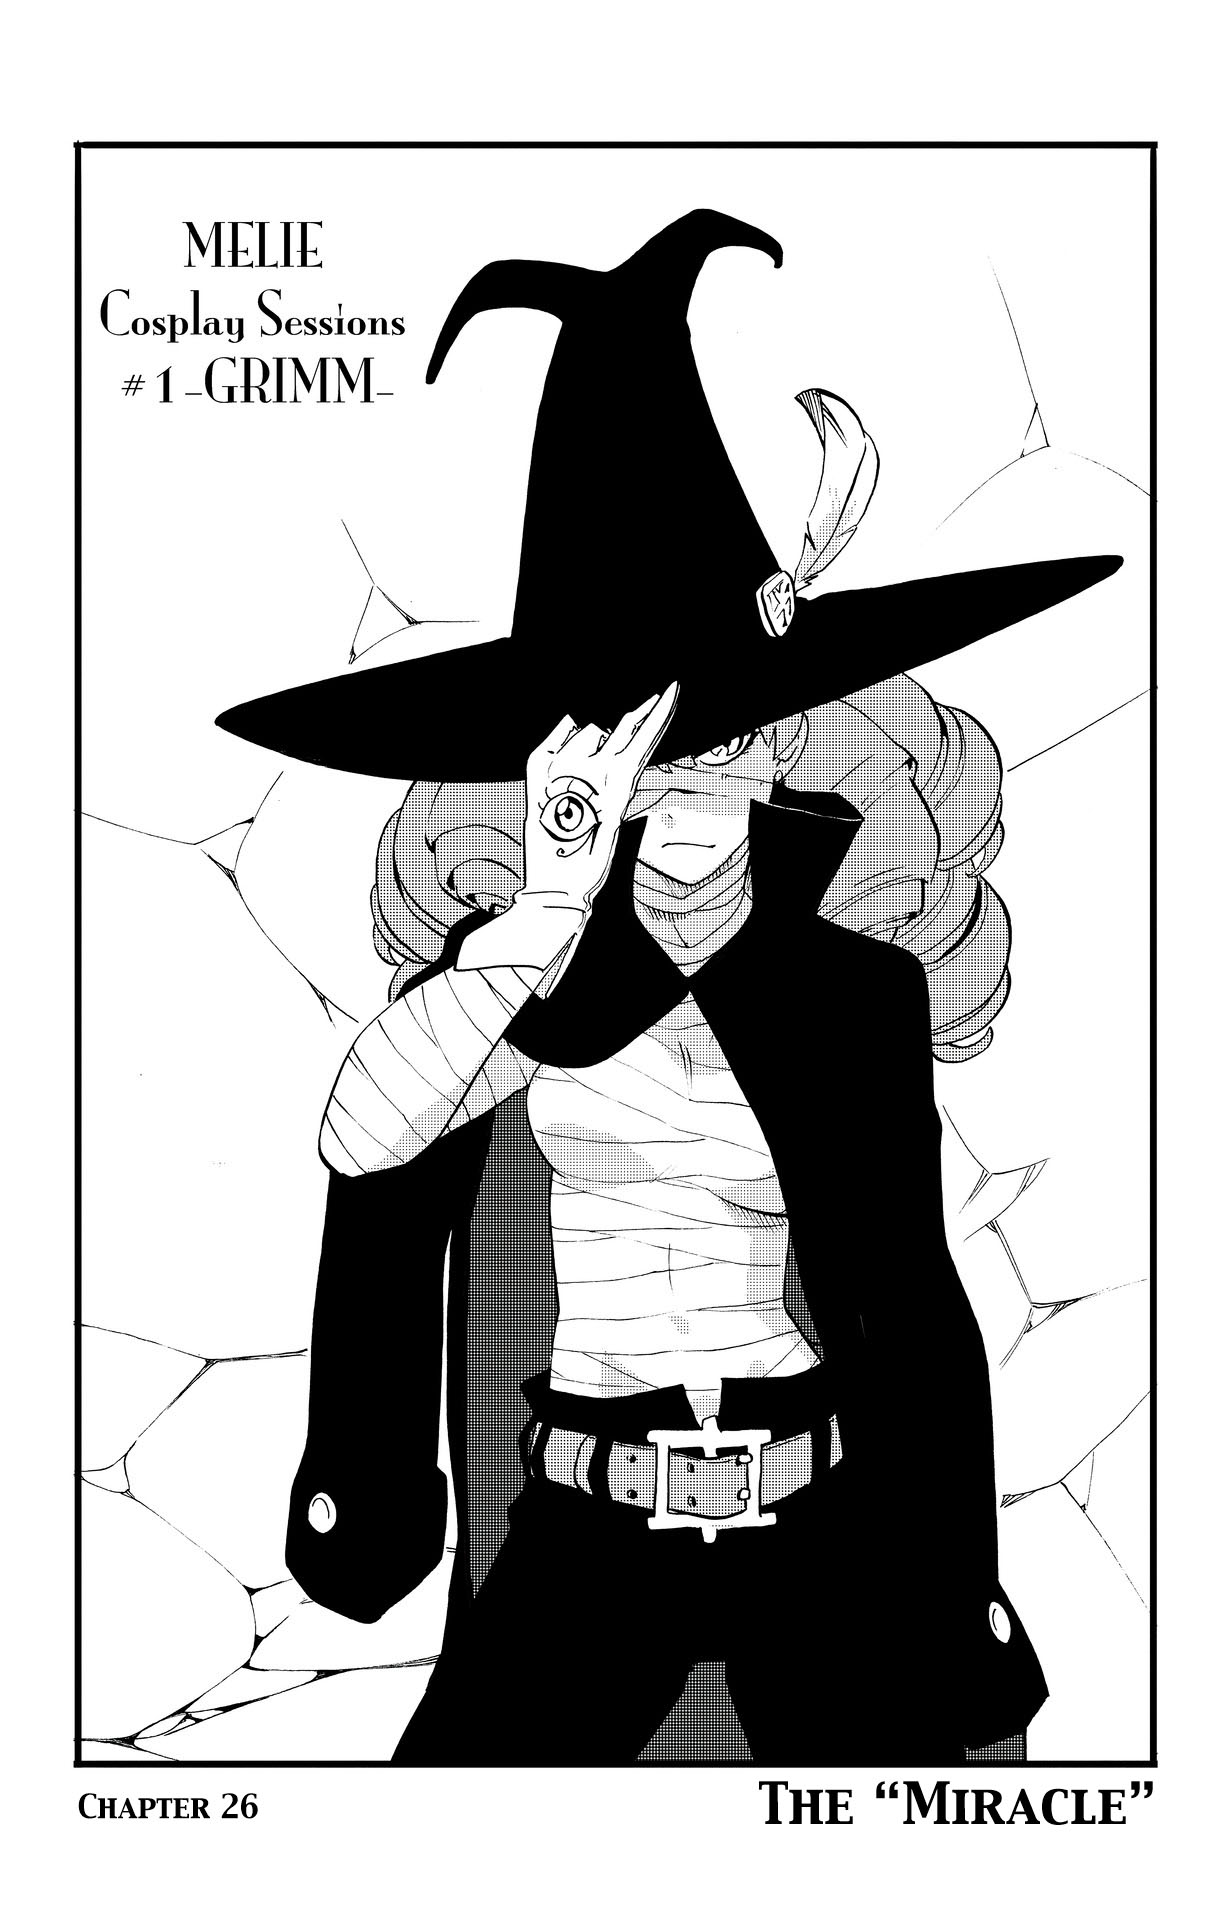 Radiant Vol. 4 Ch. 26 The "Miracle"